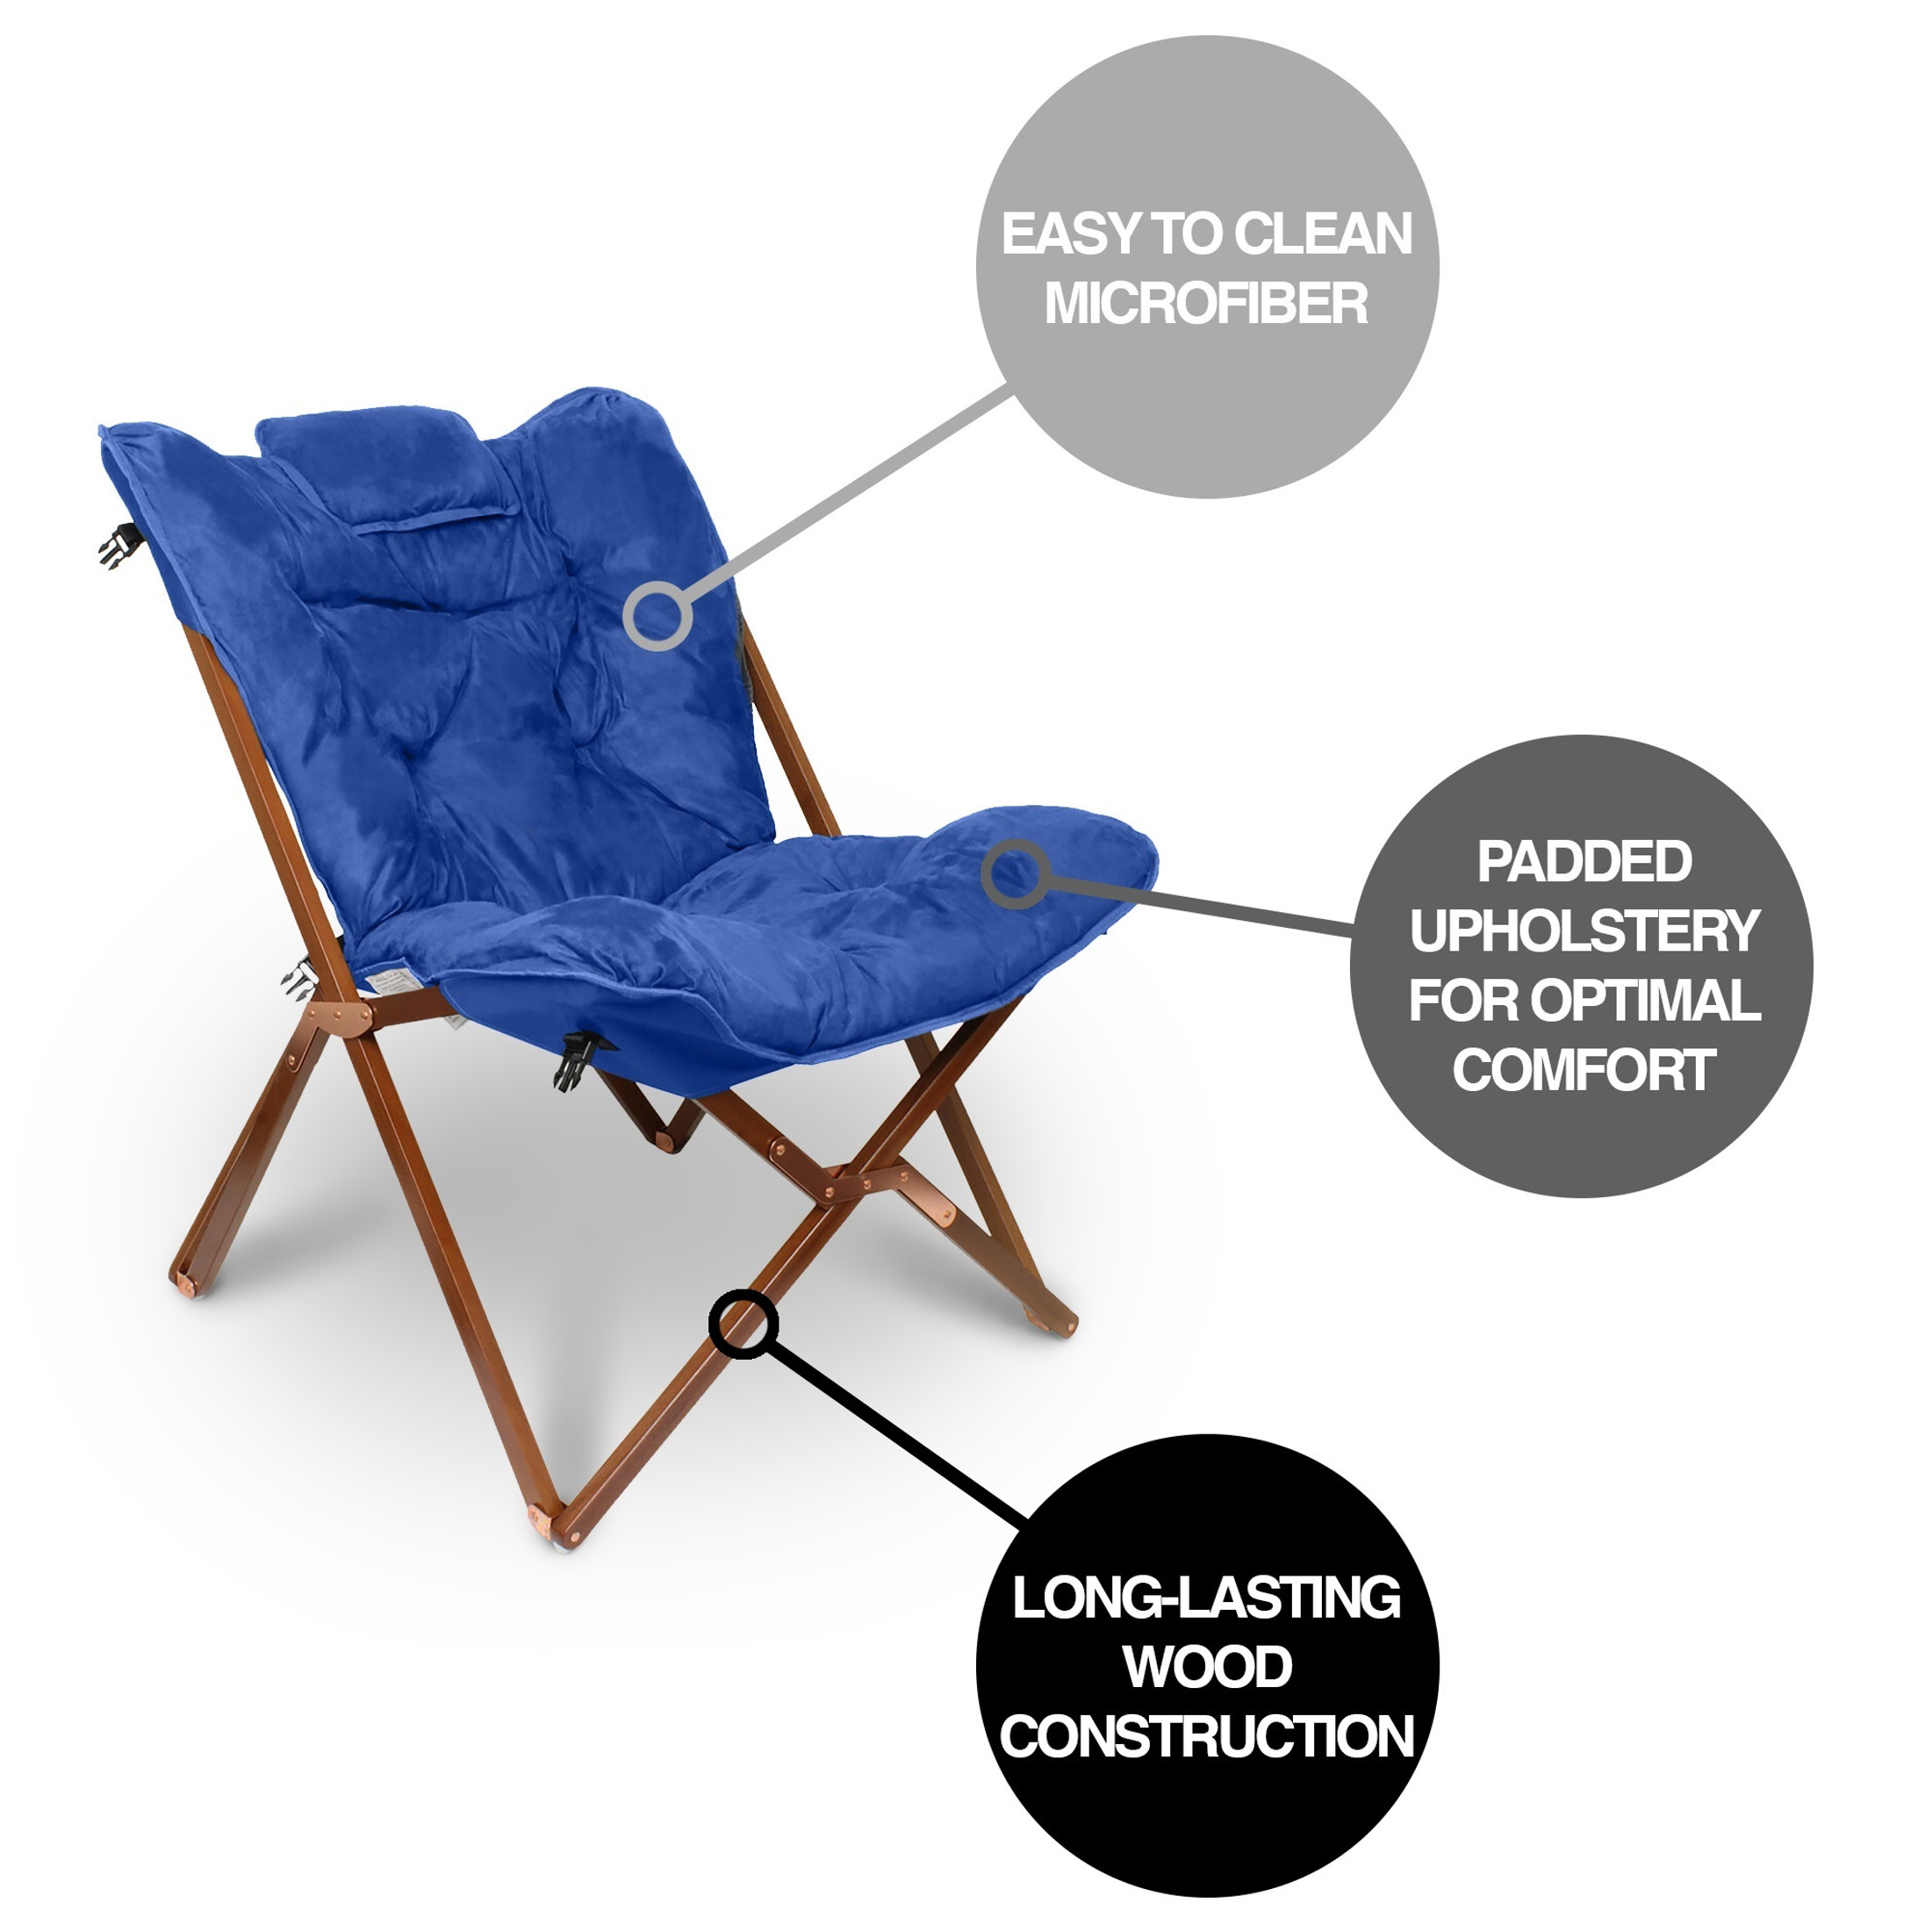 Zenithen Indoor Wood Butterfly Folding Accent Chair For Dorms, Bedrooms, and Living Rooms, Royal Blue (Reboxed)